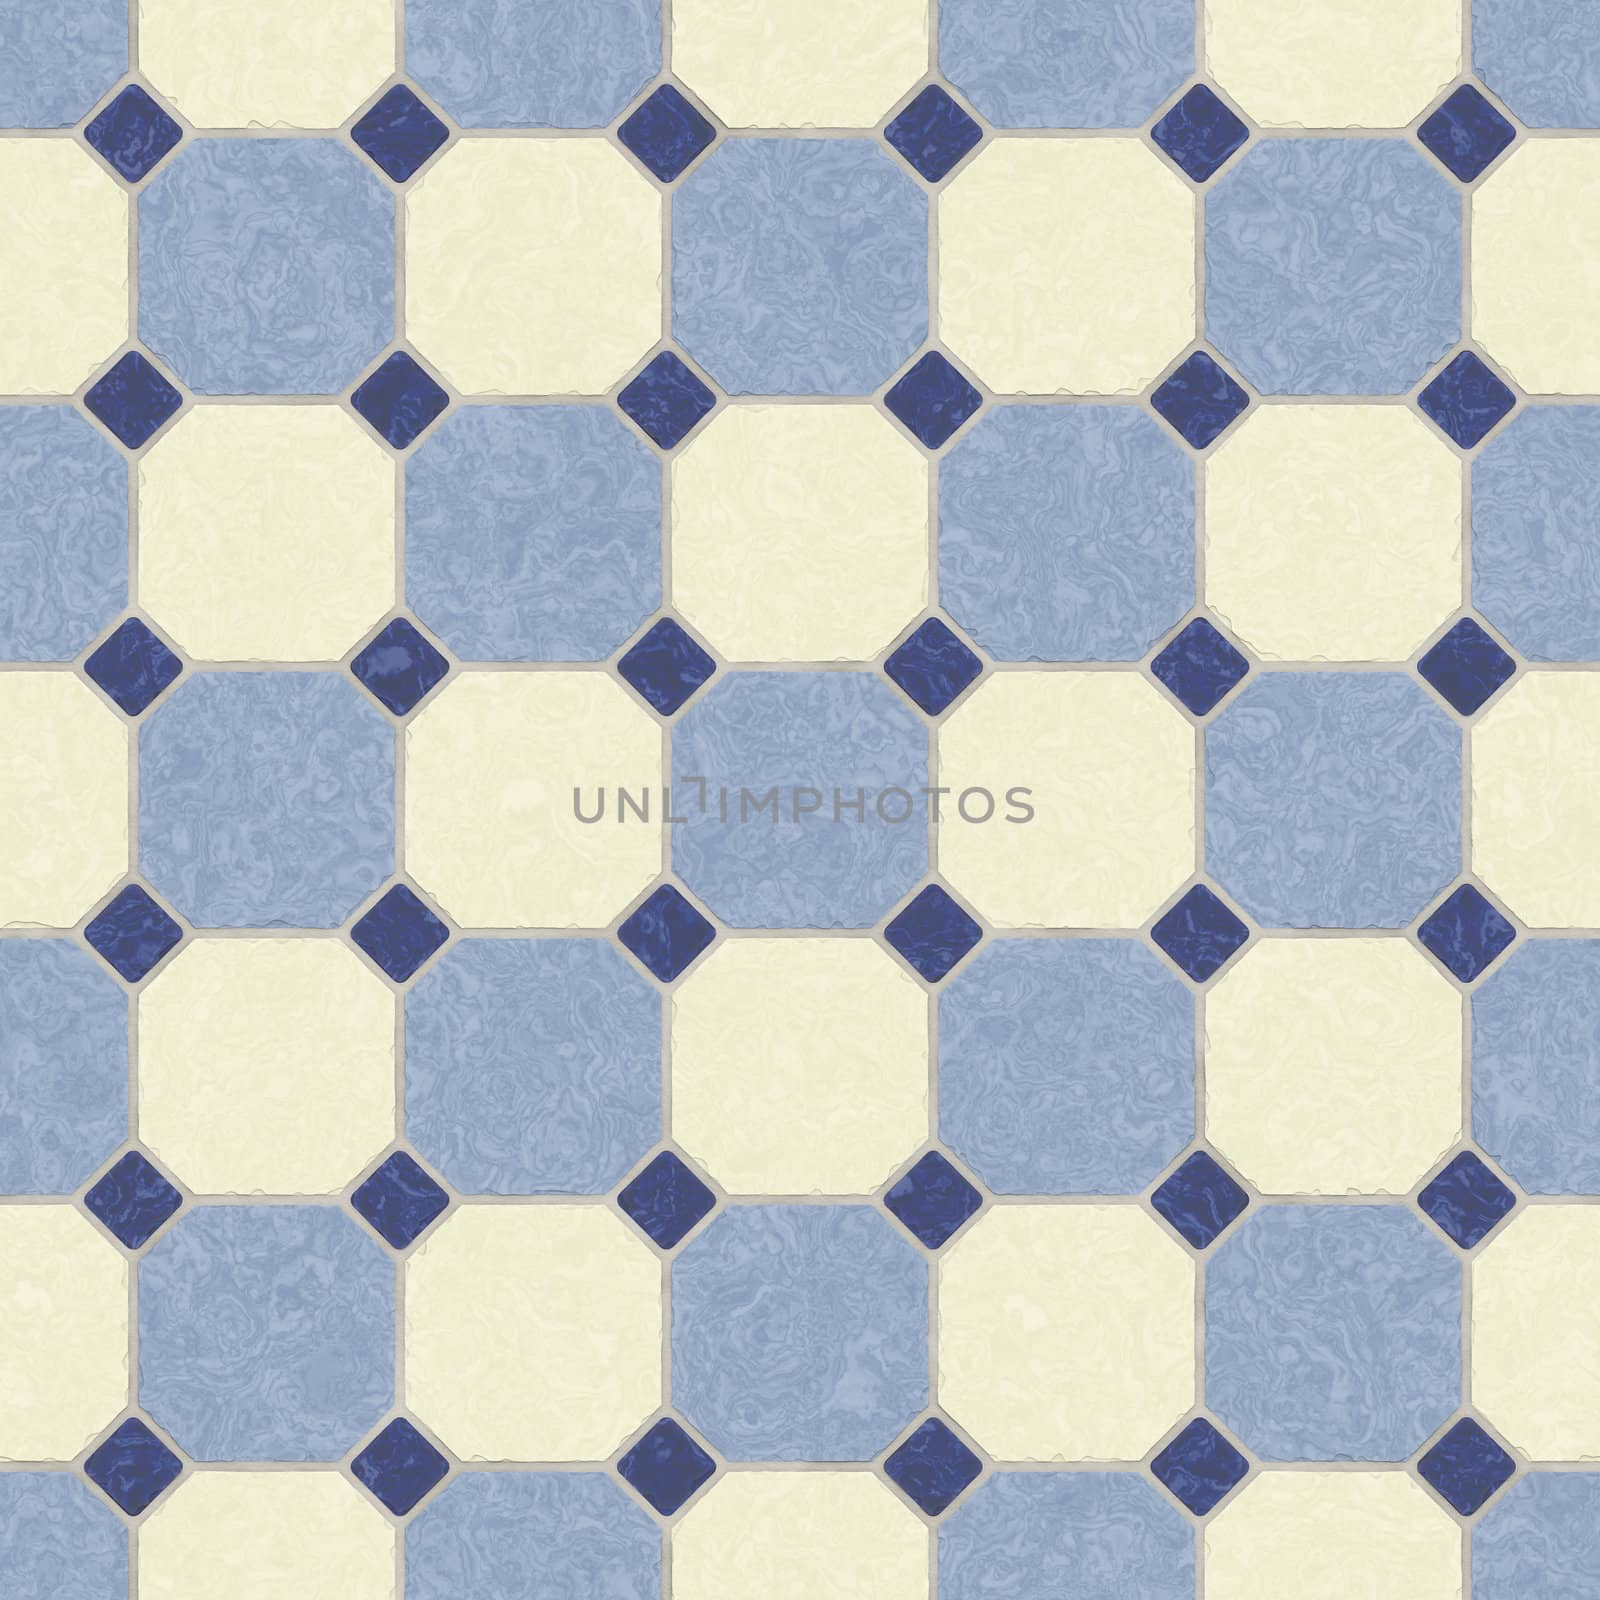 tiled floor background by clearviewstock